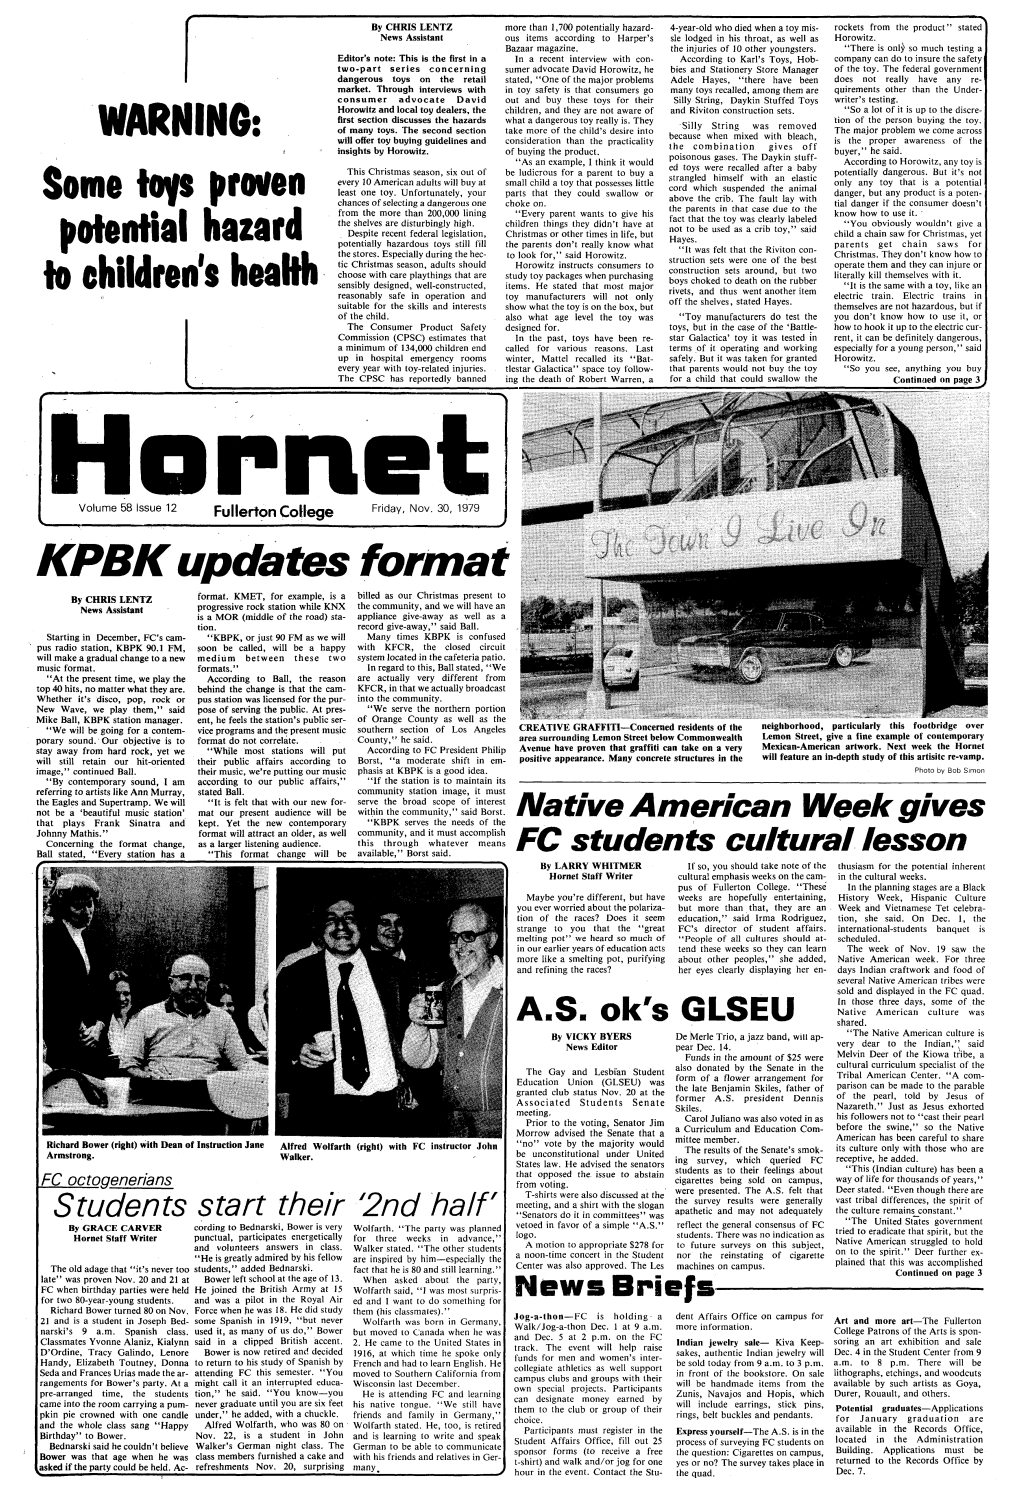 The Hornet, 1923 - 2006 - Link Page Previous Volume 58, Issue 11 Next Volume 58, Issue 13